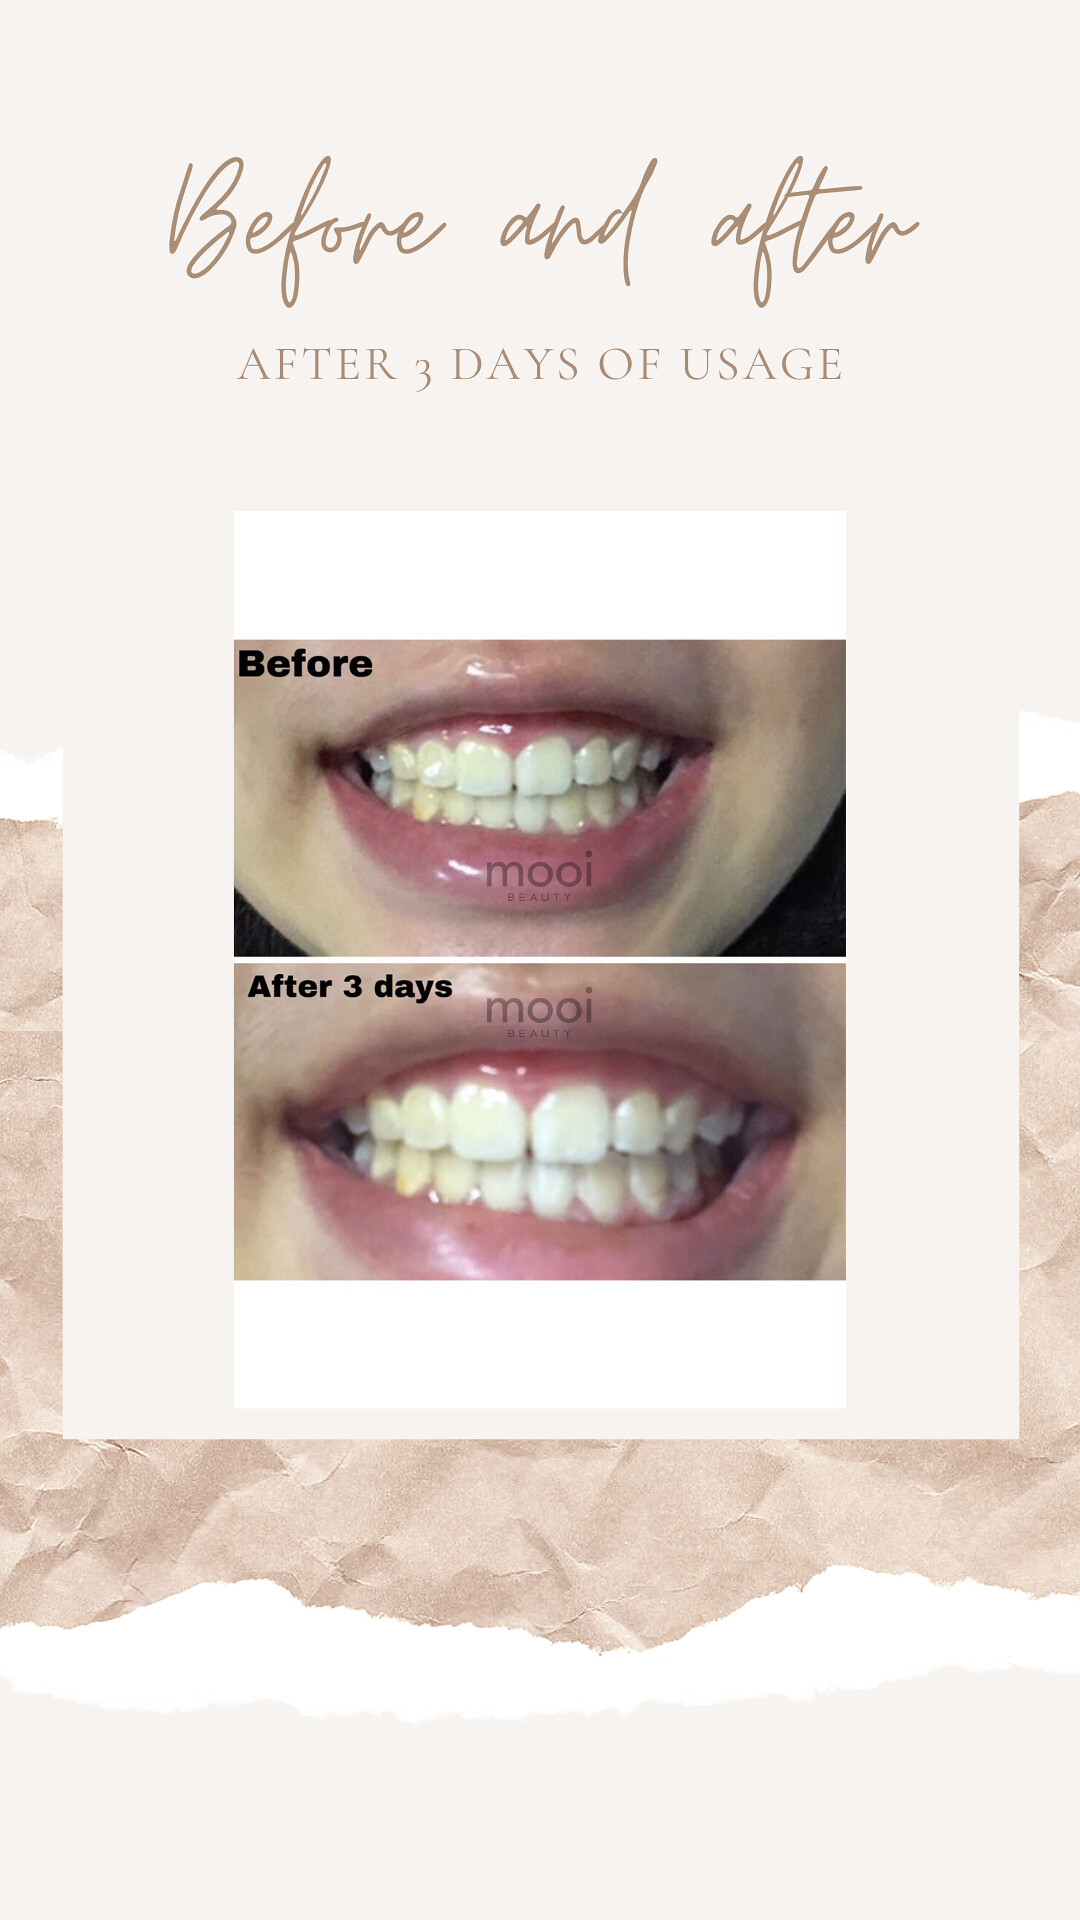 mooi teeth whitening before after